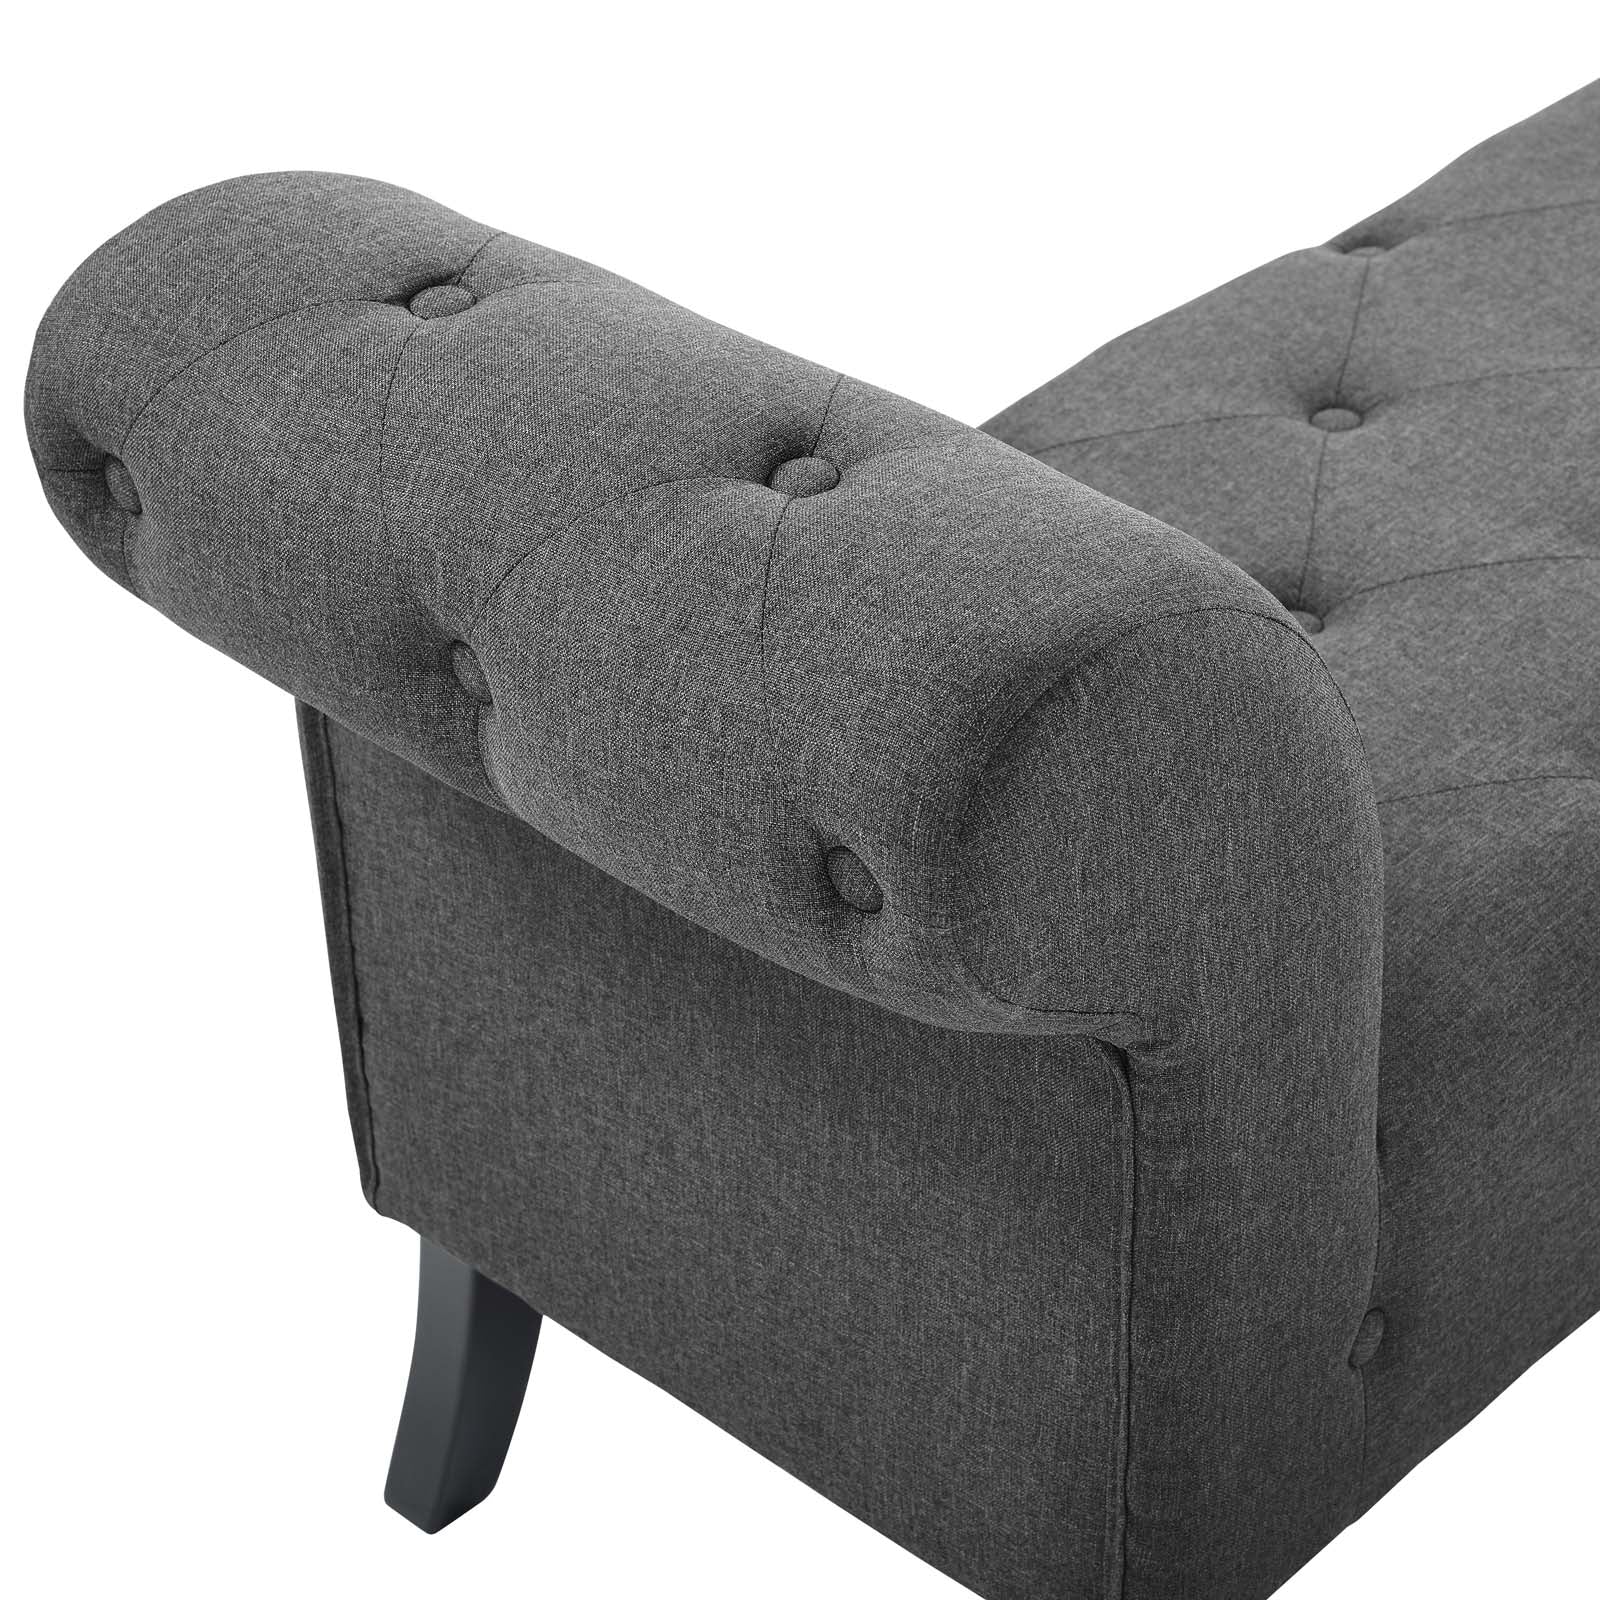 Evince Button Tufted Accent Upholstered Fabric Bench